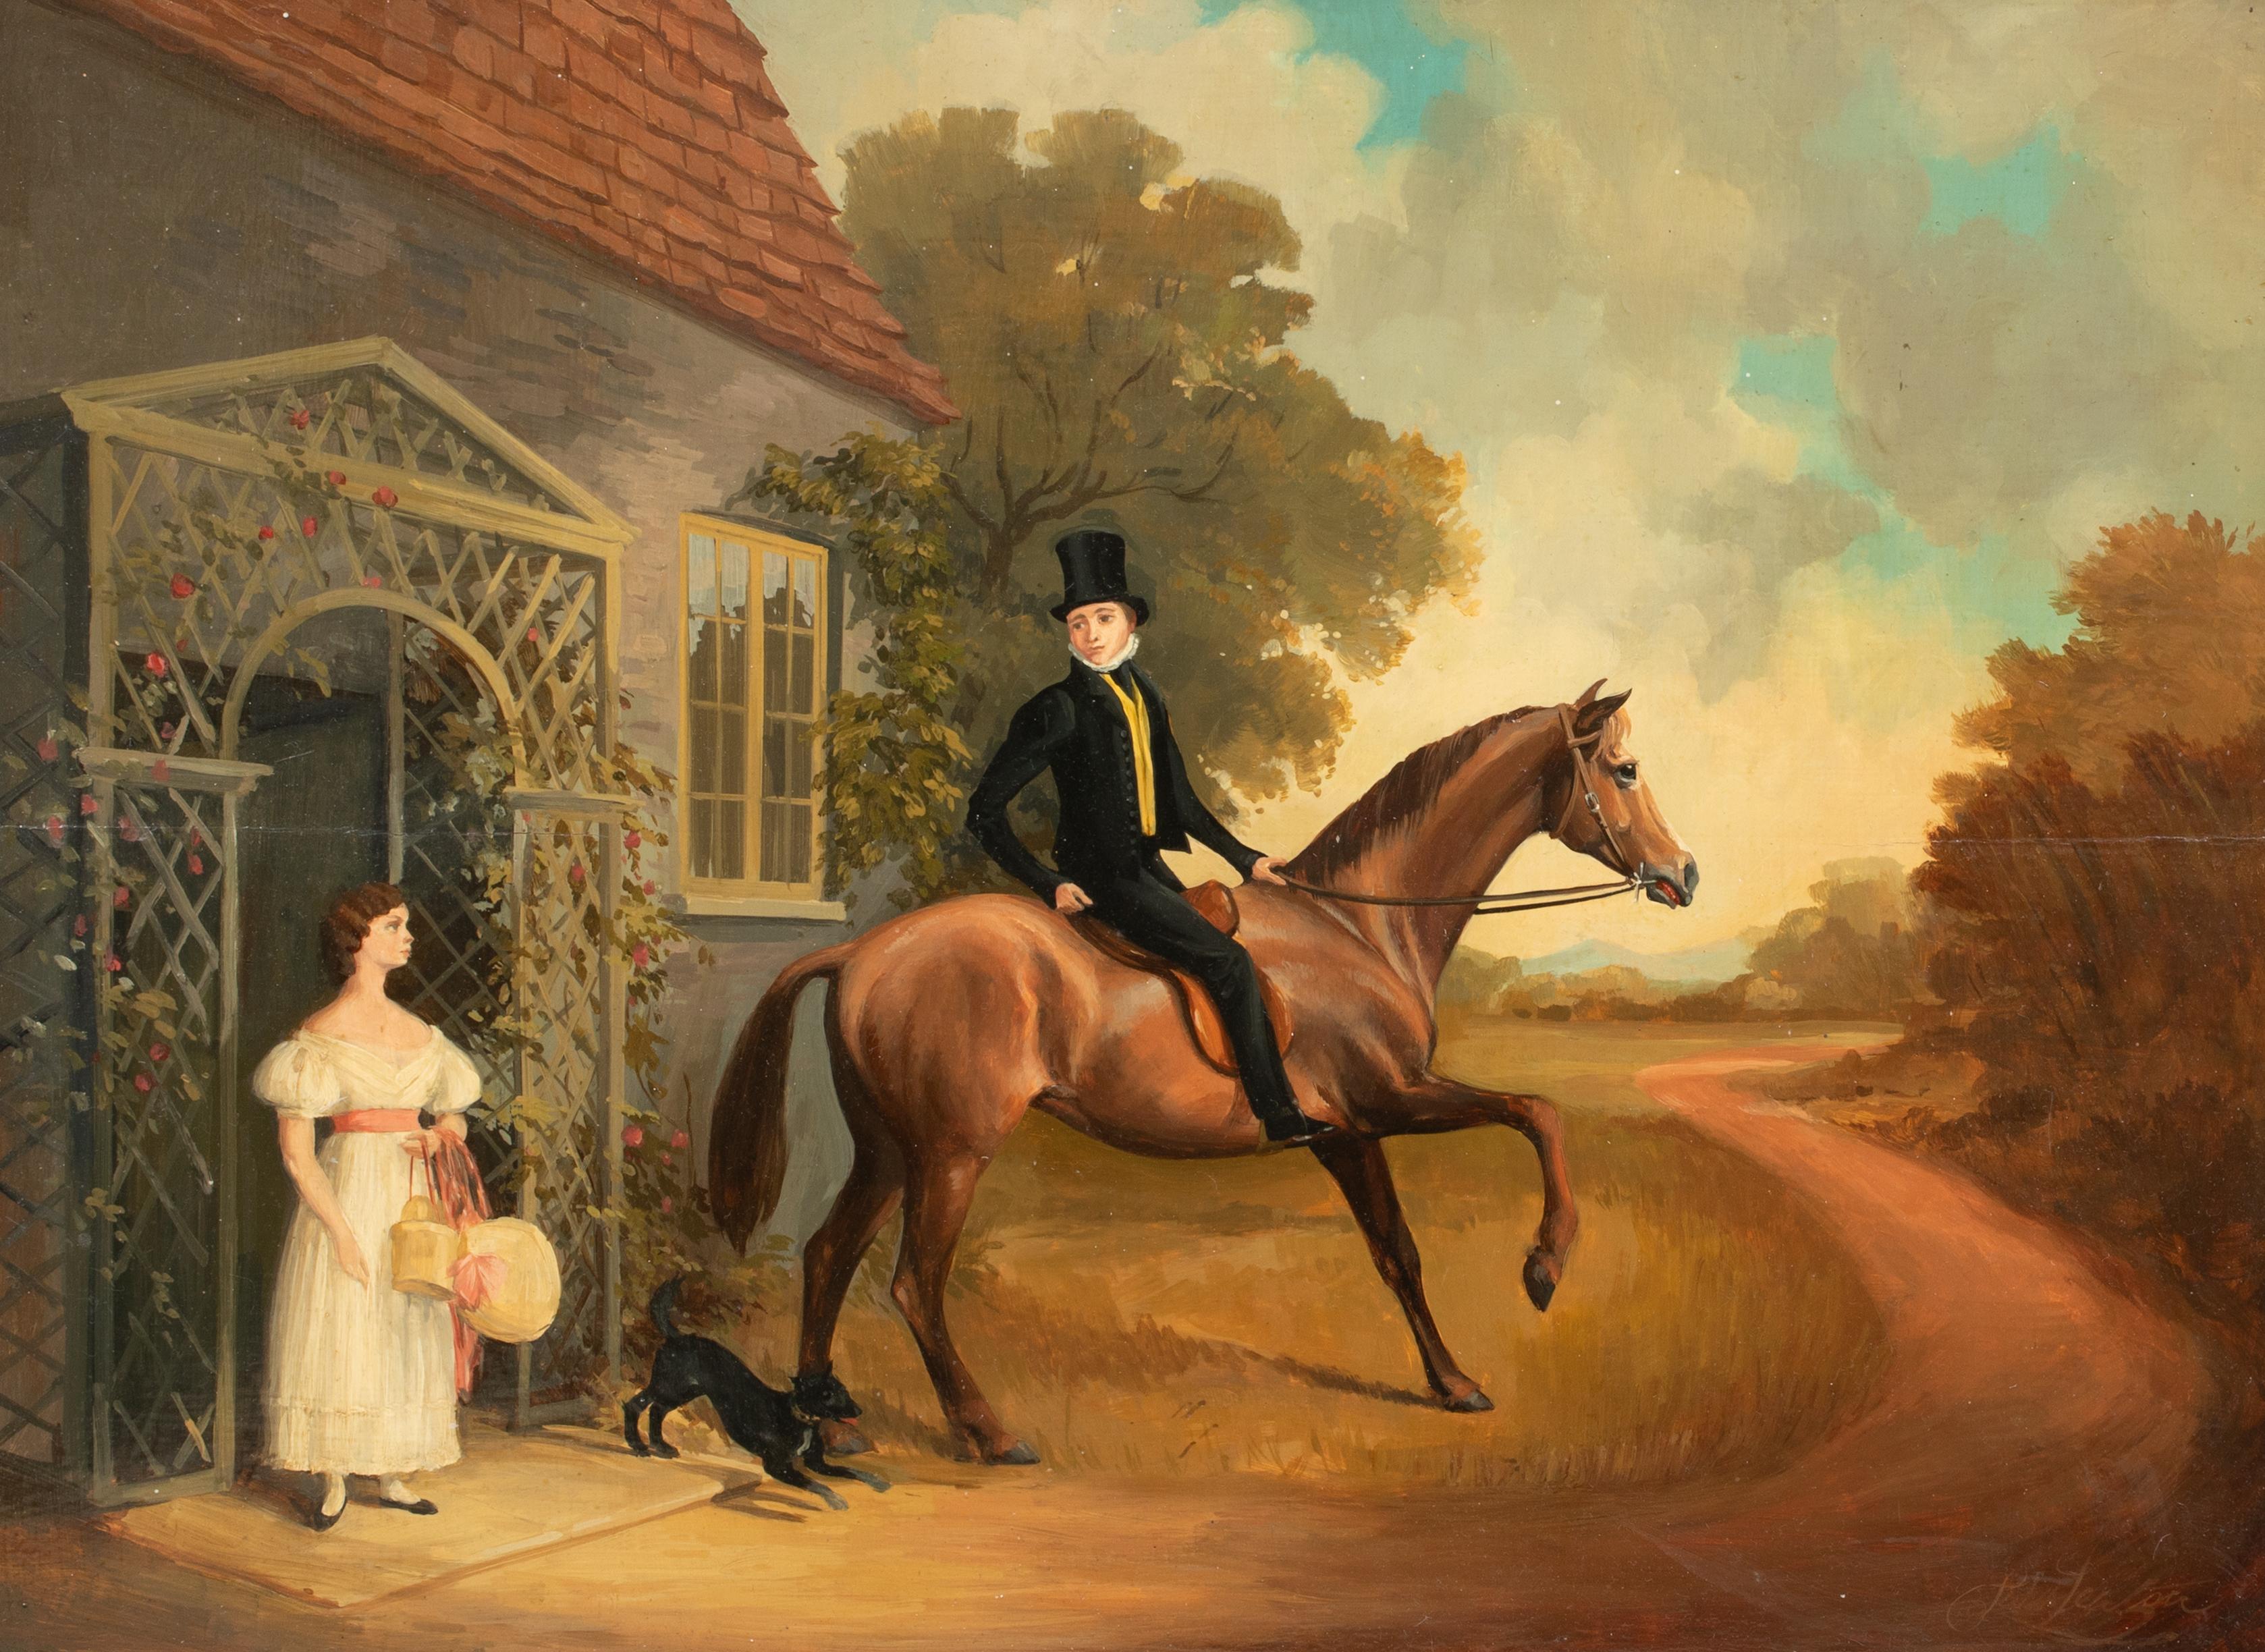 The Farewell, 19th Century 

English Provincial School

Large 19th Century English Provincial School country scene of a gentleman departing his lover, oil on canvas. Charming circa 1840 rural scene of the lady and gentleman outside their country